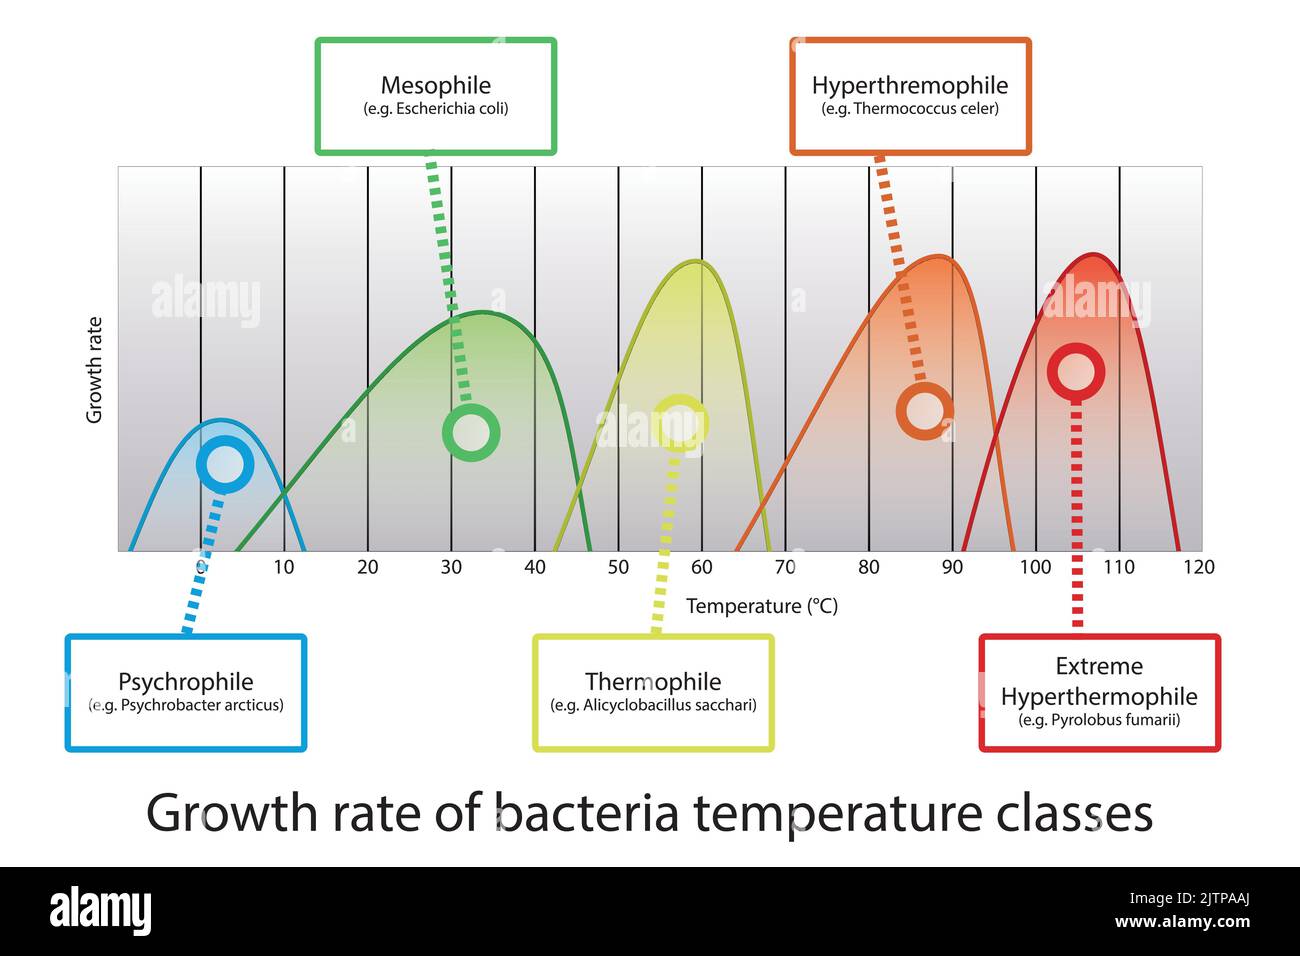 Diagram of microorganism optimal temperature range - Psychrophile, Mesophile, Thremophile and Hyperthermophile growth rates with example bacteria. Stock Vector